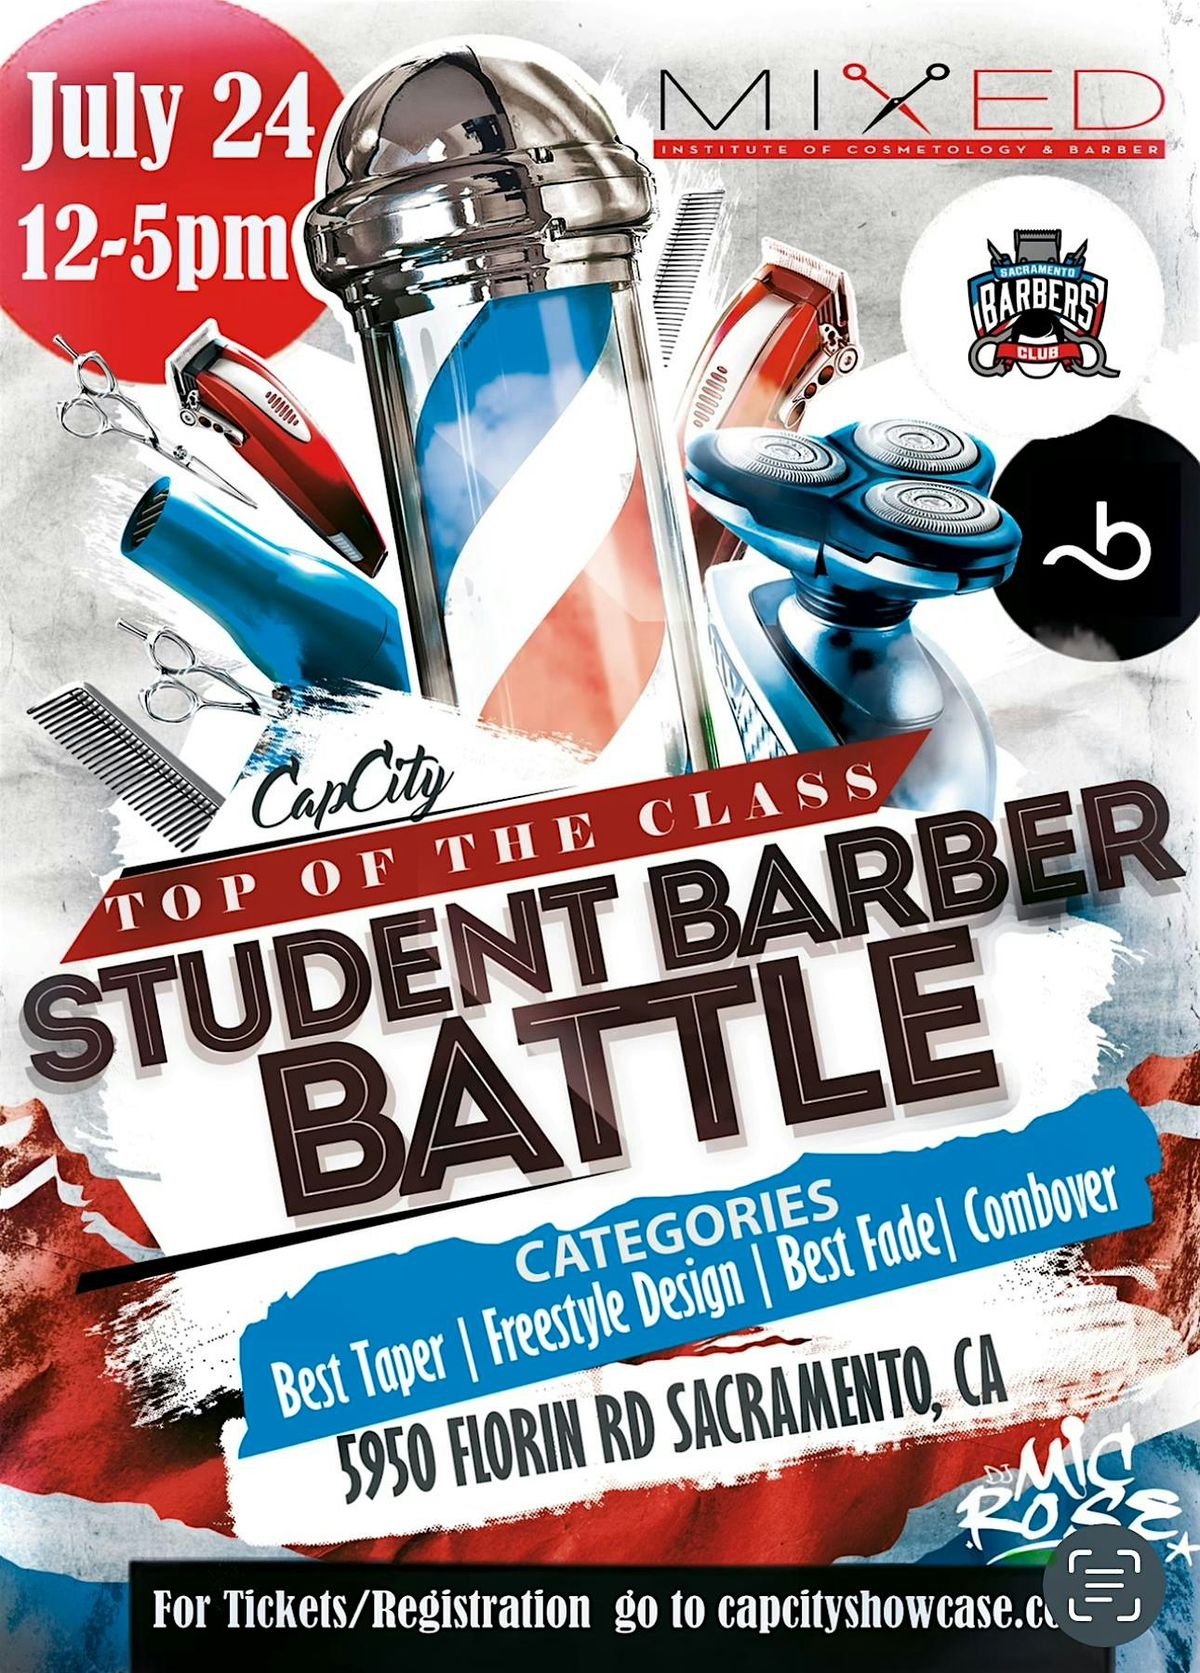 Top Of The Class Student Barber Battle